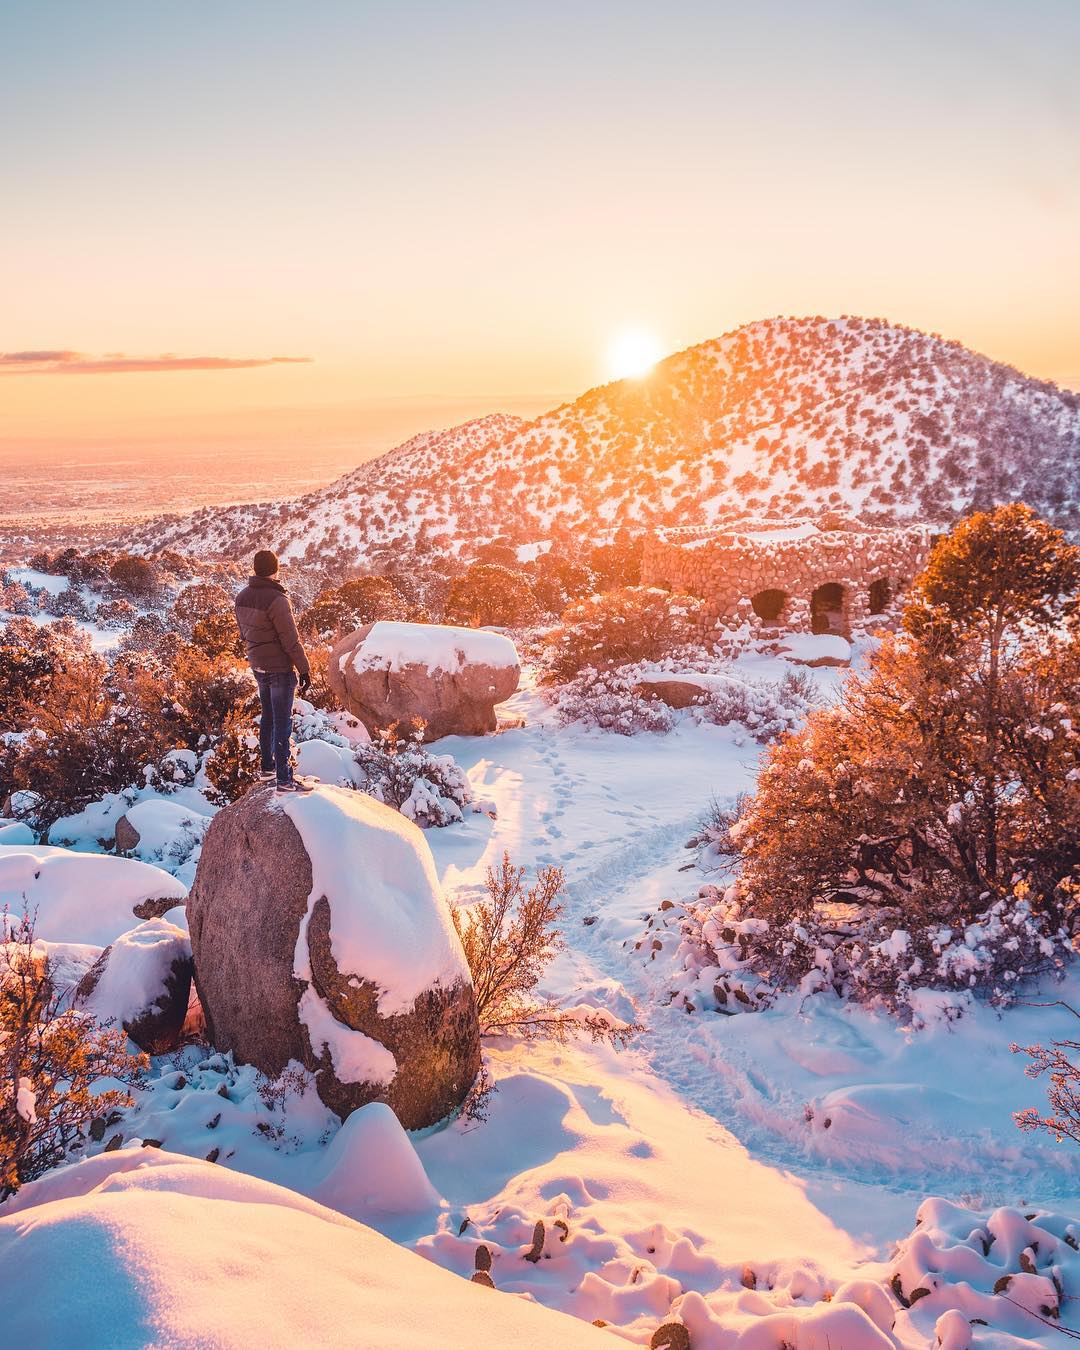 Man standing on a snow-covered rock looking at the horizon. Photo by Instagram user @bklyphoto